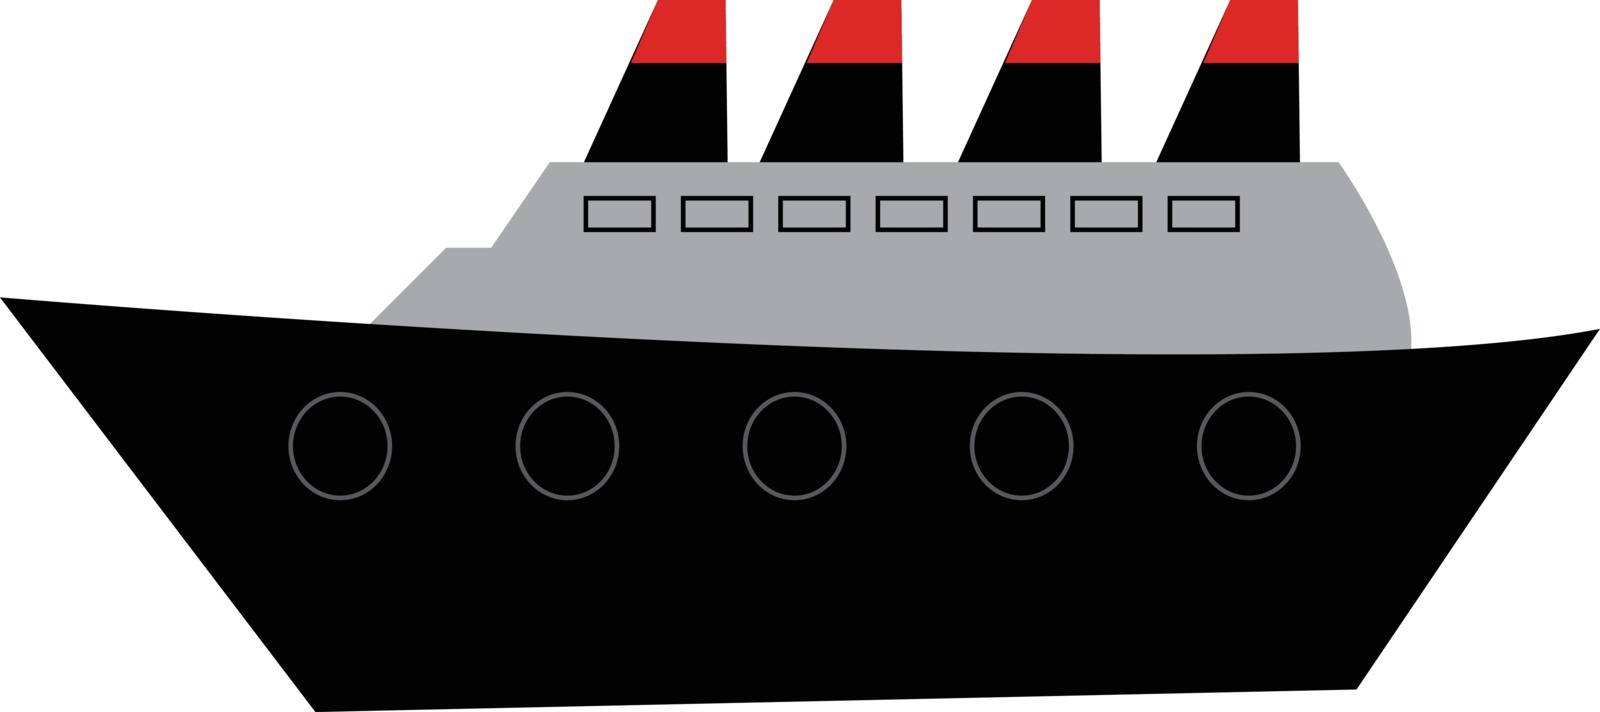 Clipart of the famous ship titanic on its maiden voyage vector color drawing or illustration 